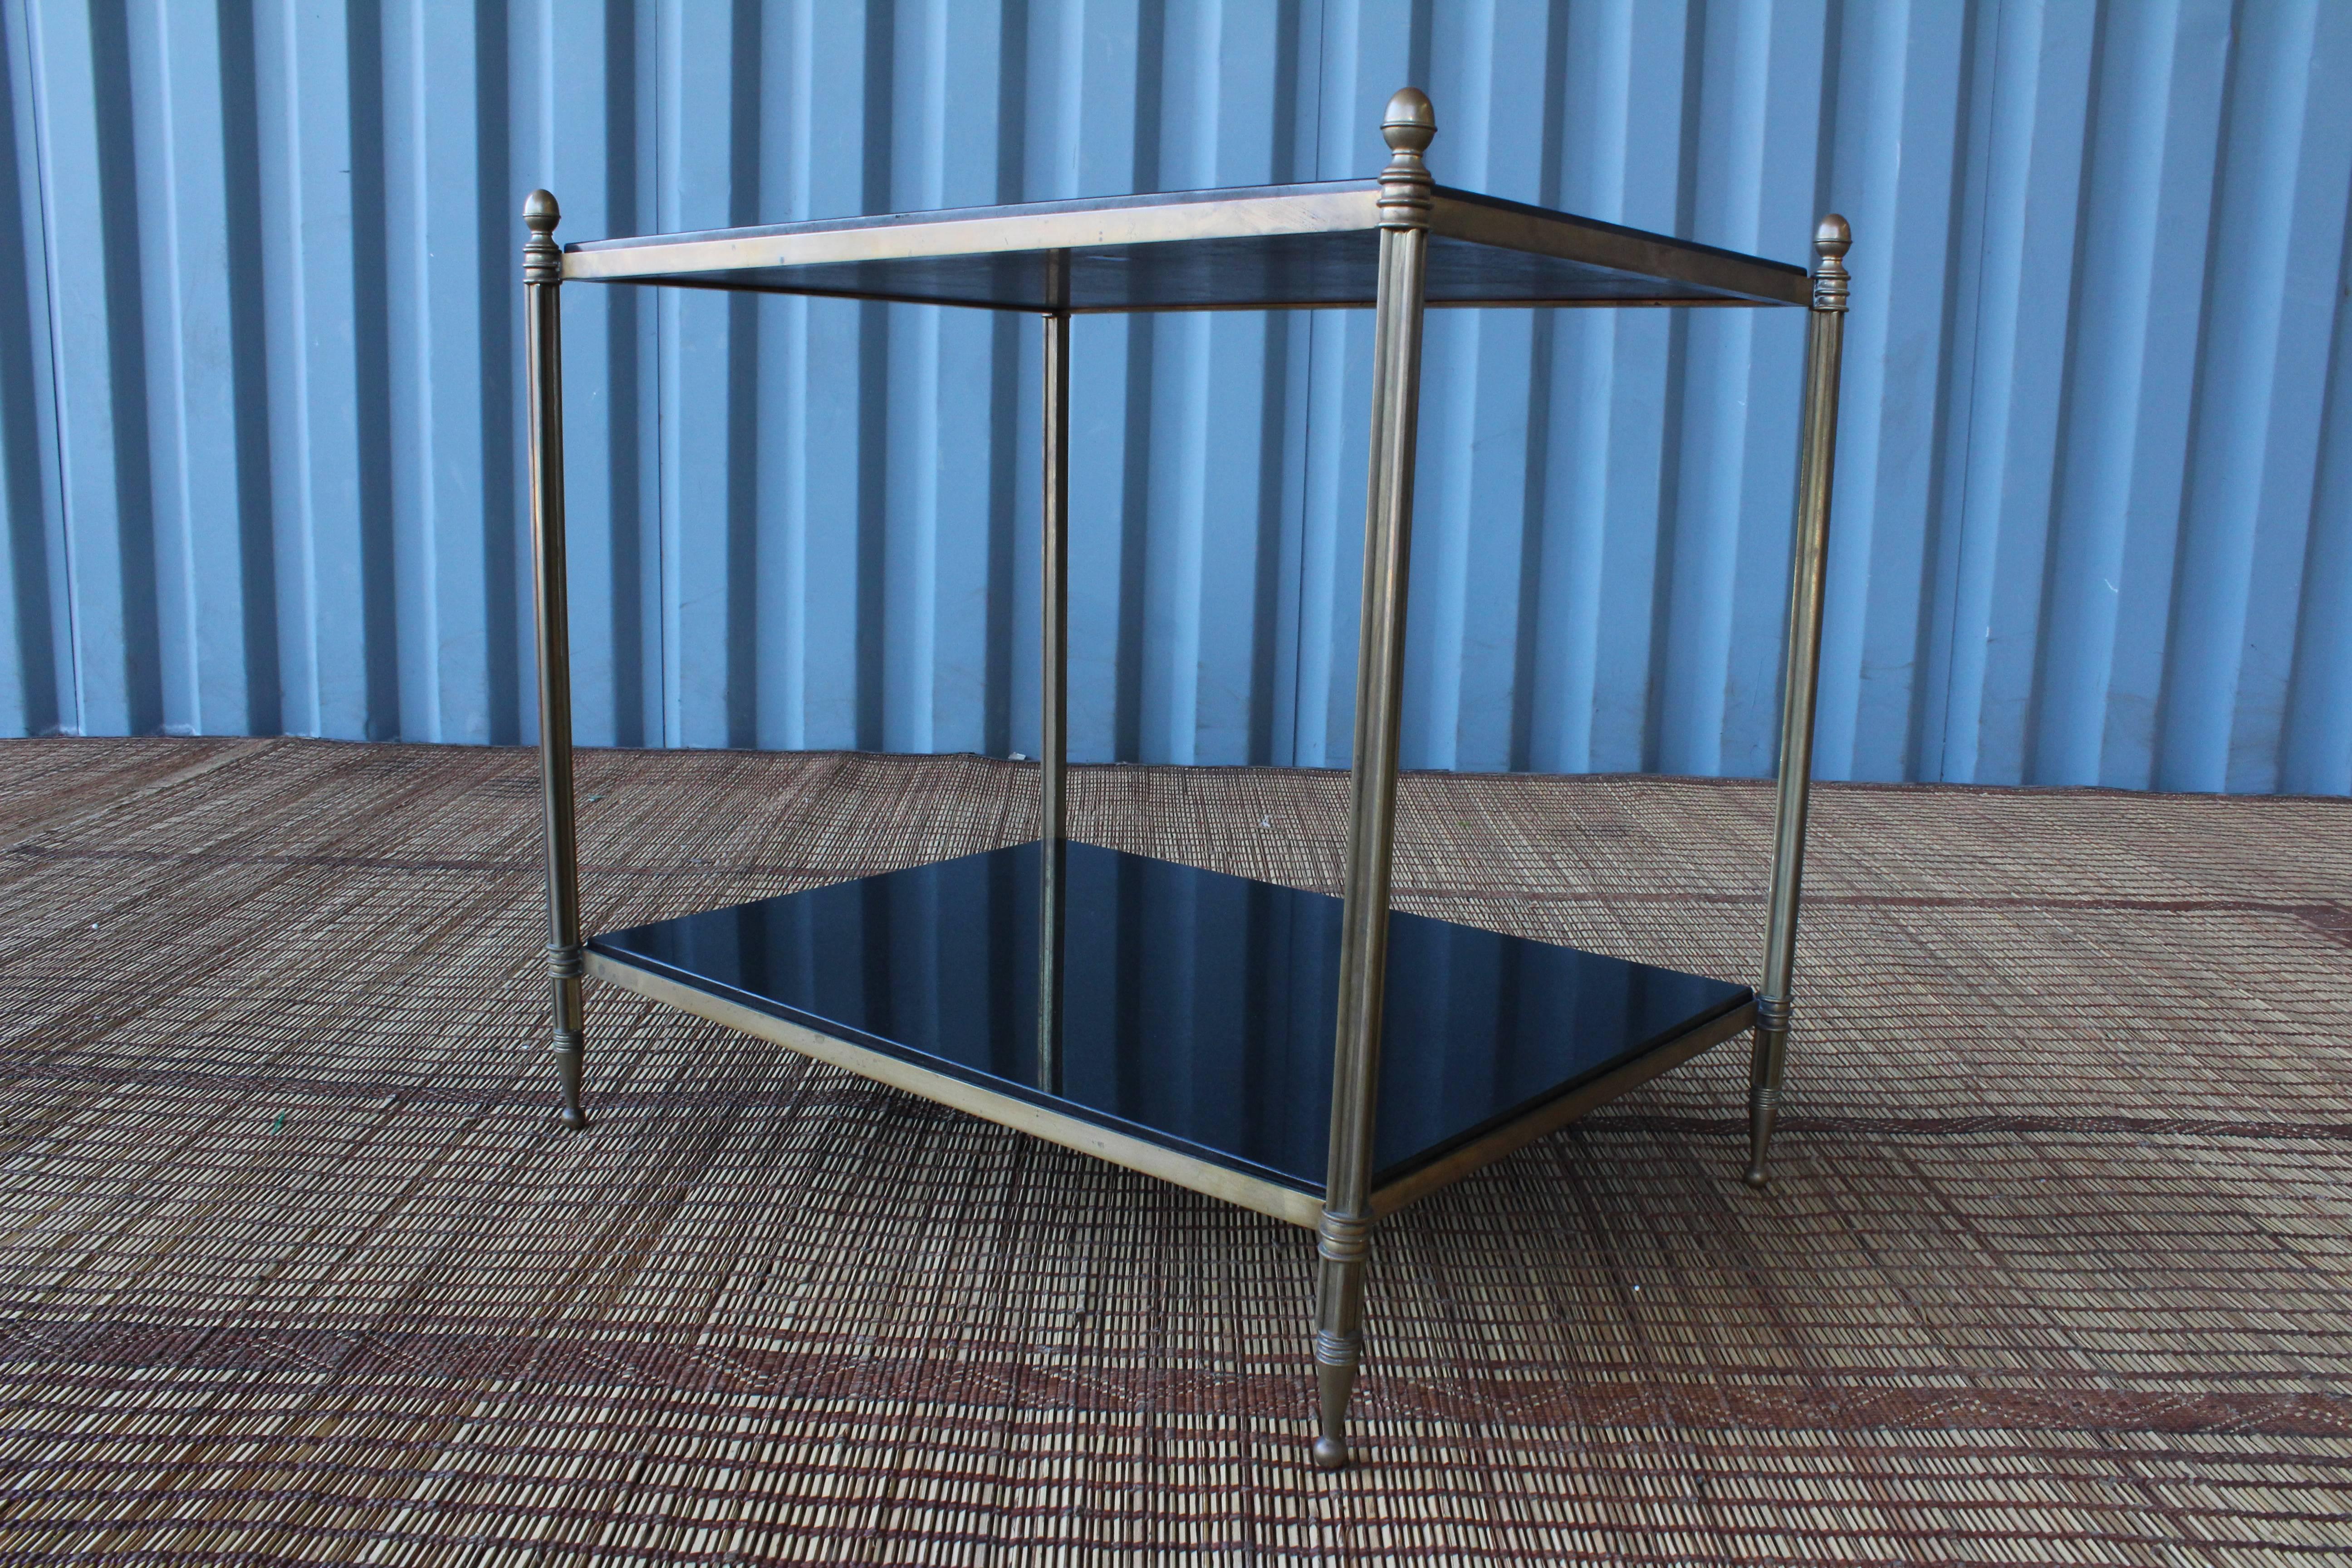 Solid brass two-tiered side table with black granite tops, France, 1950s. Excellent condition with age appropriate patina to the brass.